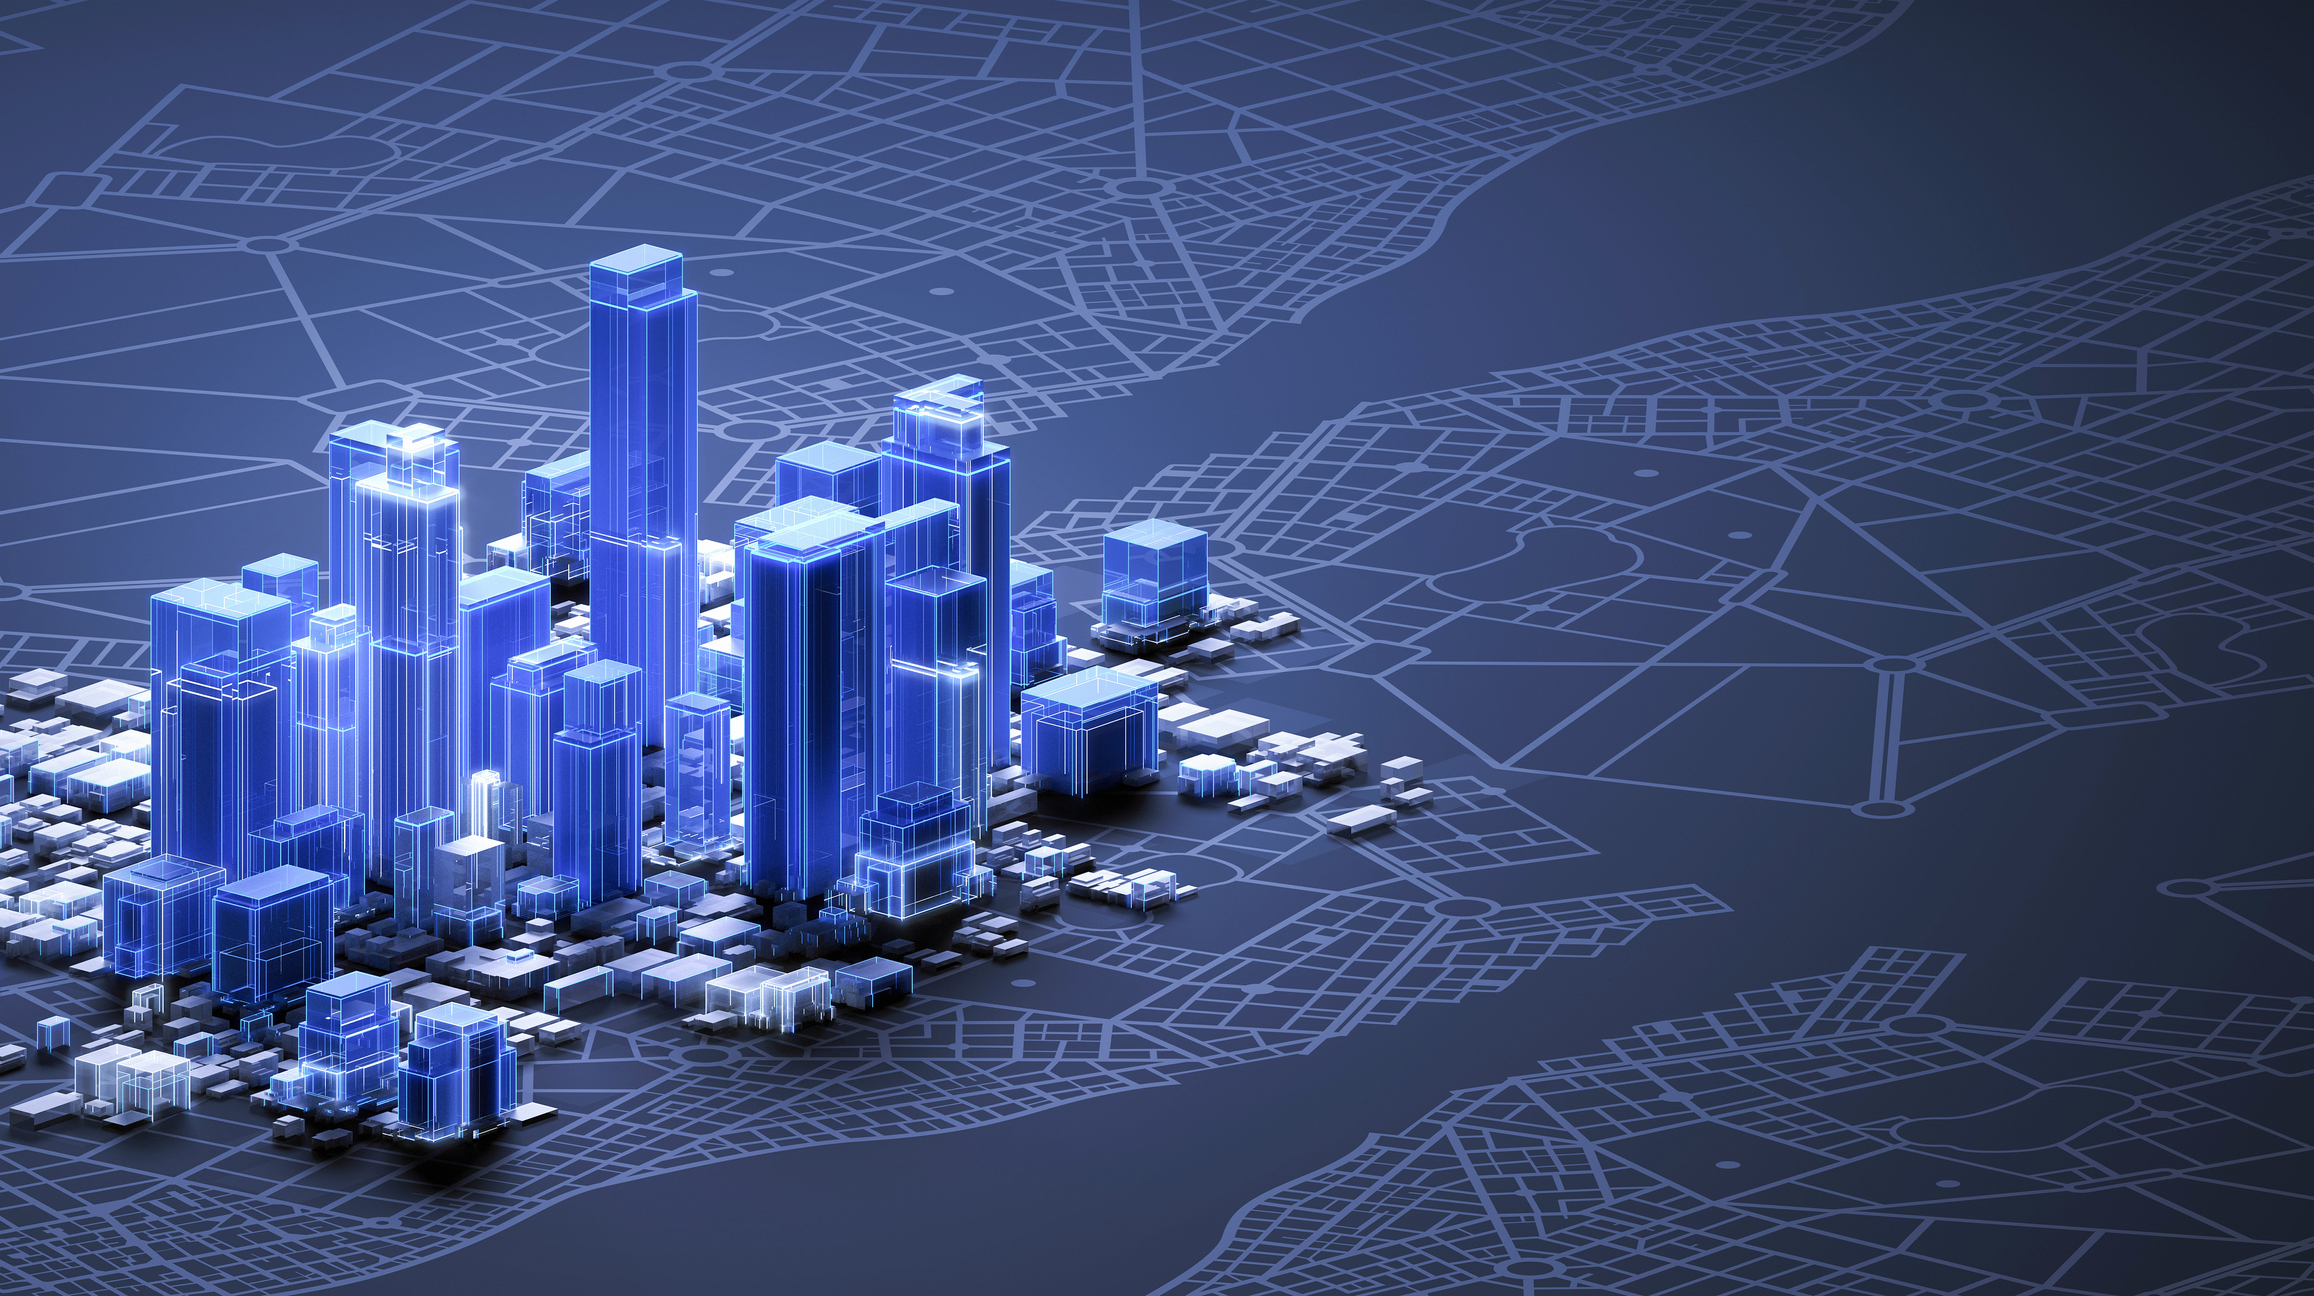 Aerial view of an abstract smart city downtown with office buildings, skyscrapers and business districts, with edges illuminated by white and blue glowing lights. Architectural model concept for construction industry, BIM, facility management, CAD architectural design. Dark background with diagram and city map, copy space on right side.